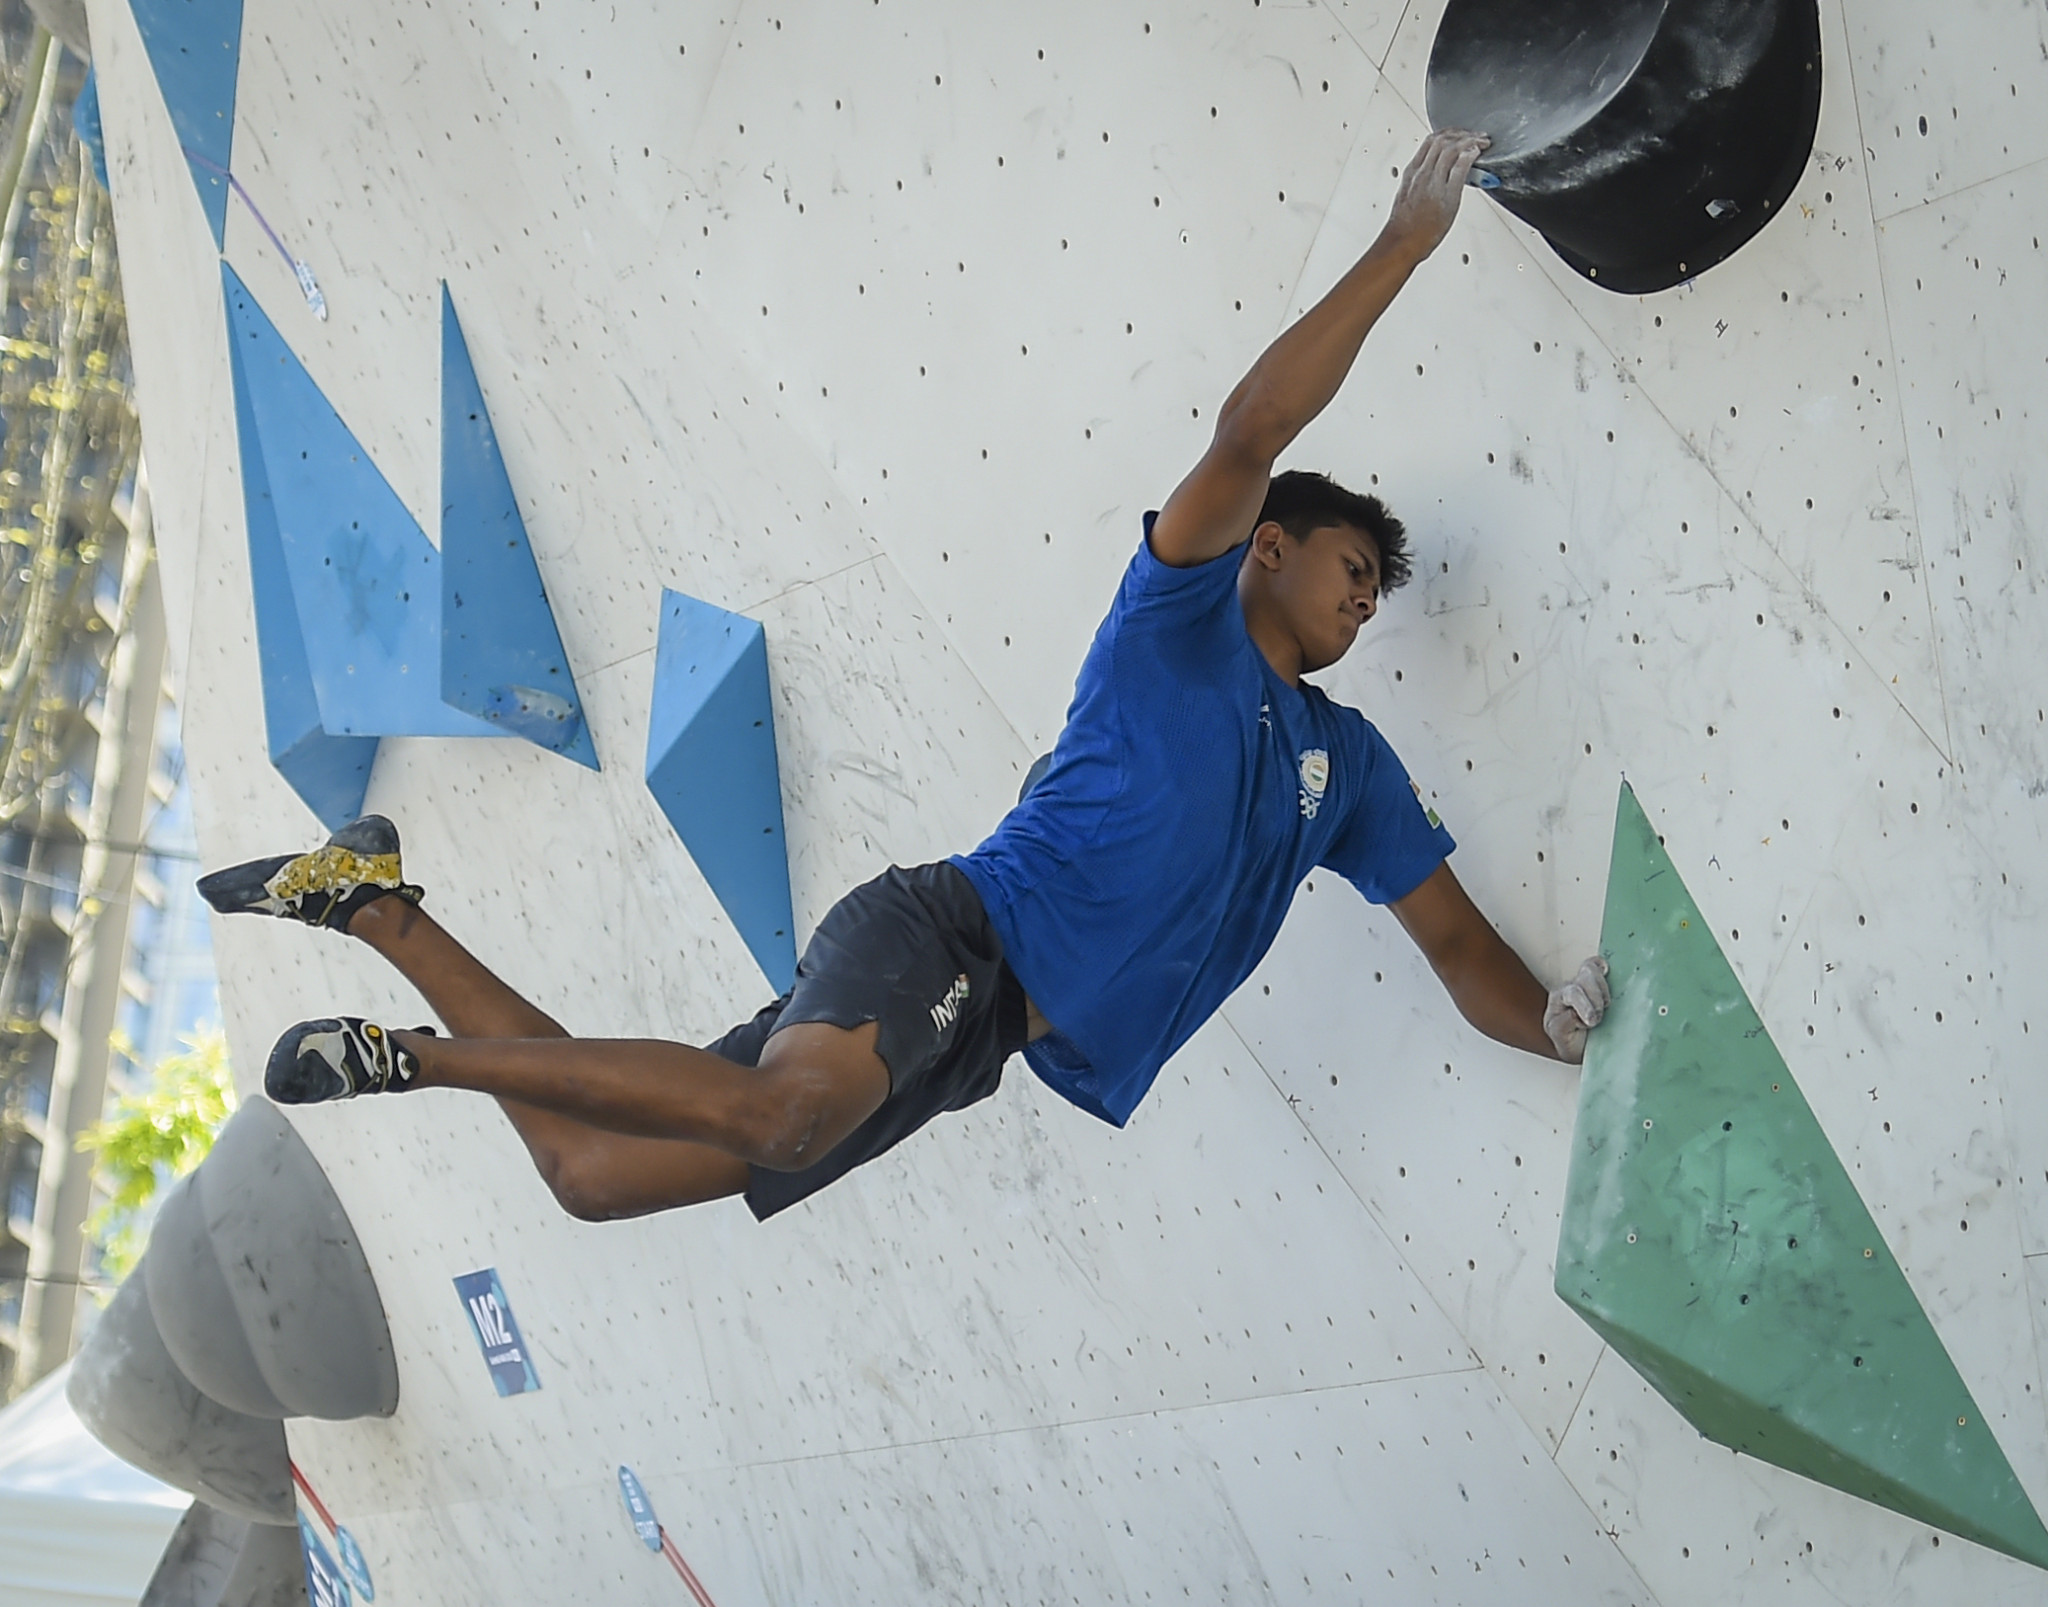 Sport climbing is enjoying its first Youth Olympics as a medal event ©Getty Images